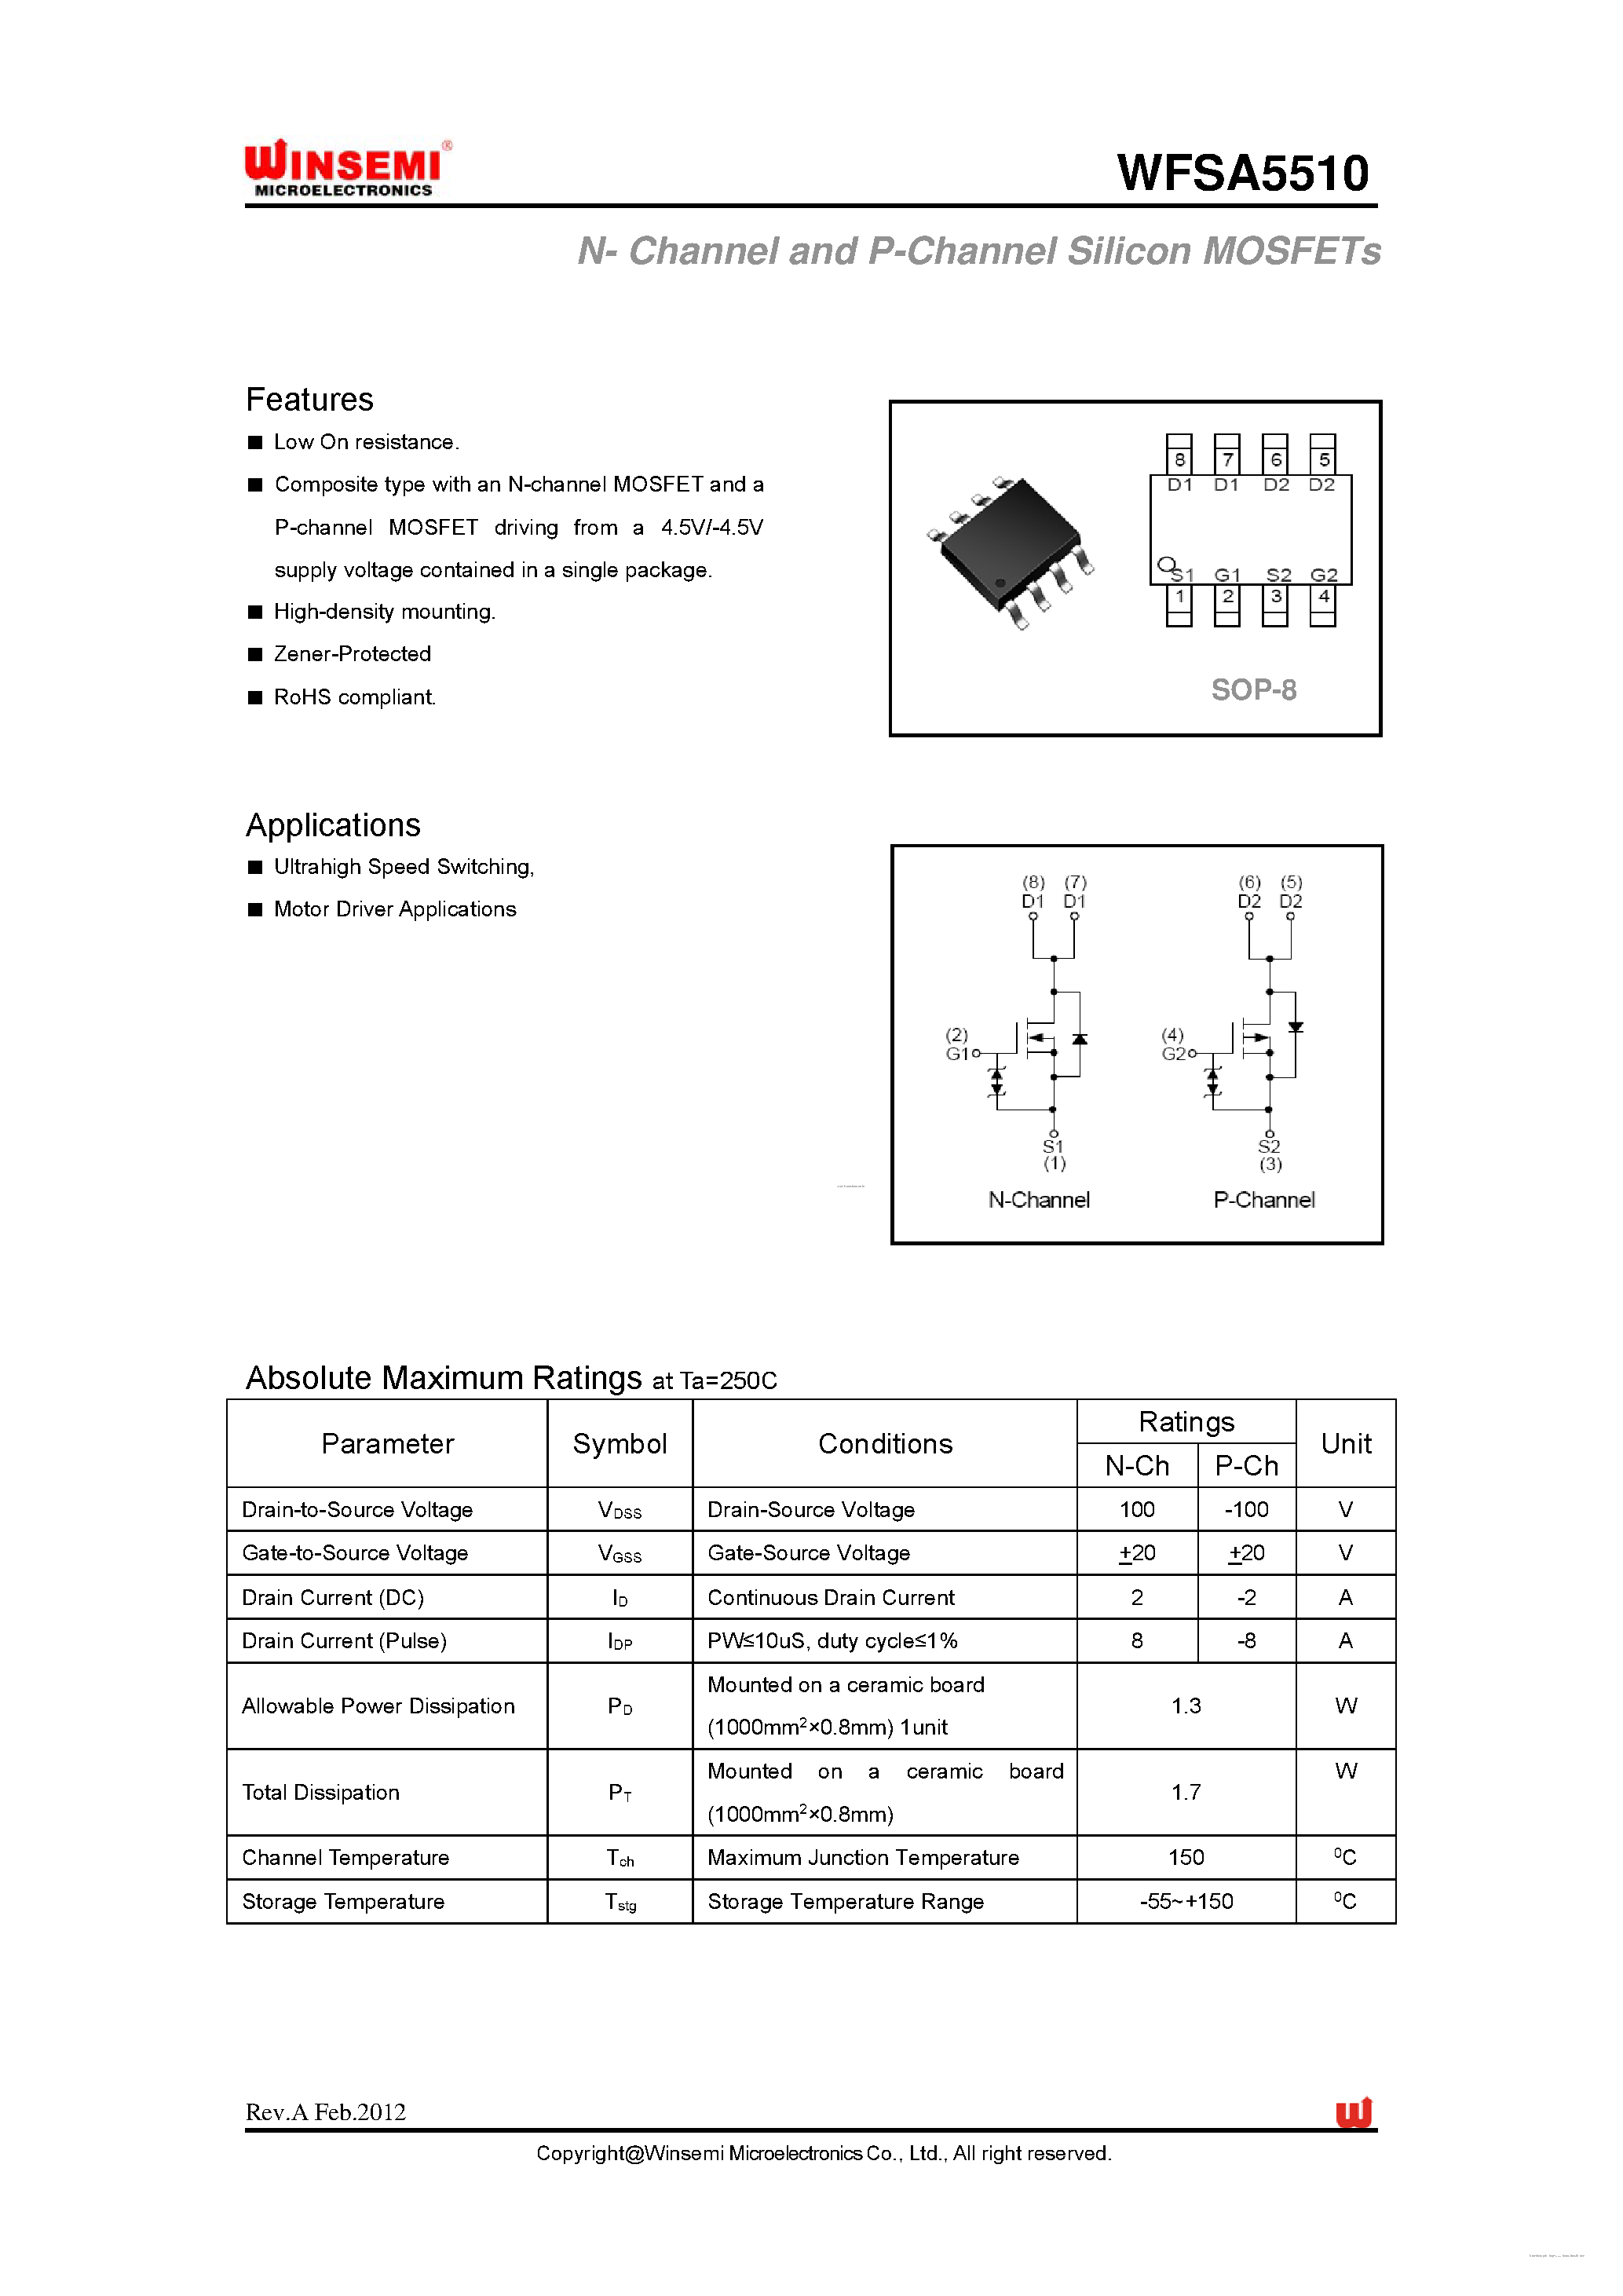 Datasheet WFSA5510 - N- Channel and P-Channel Silicon MOSFETs page 1